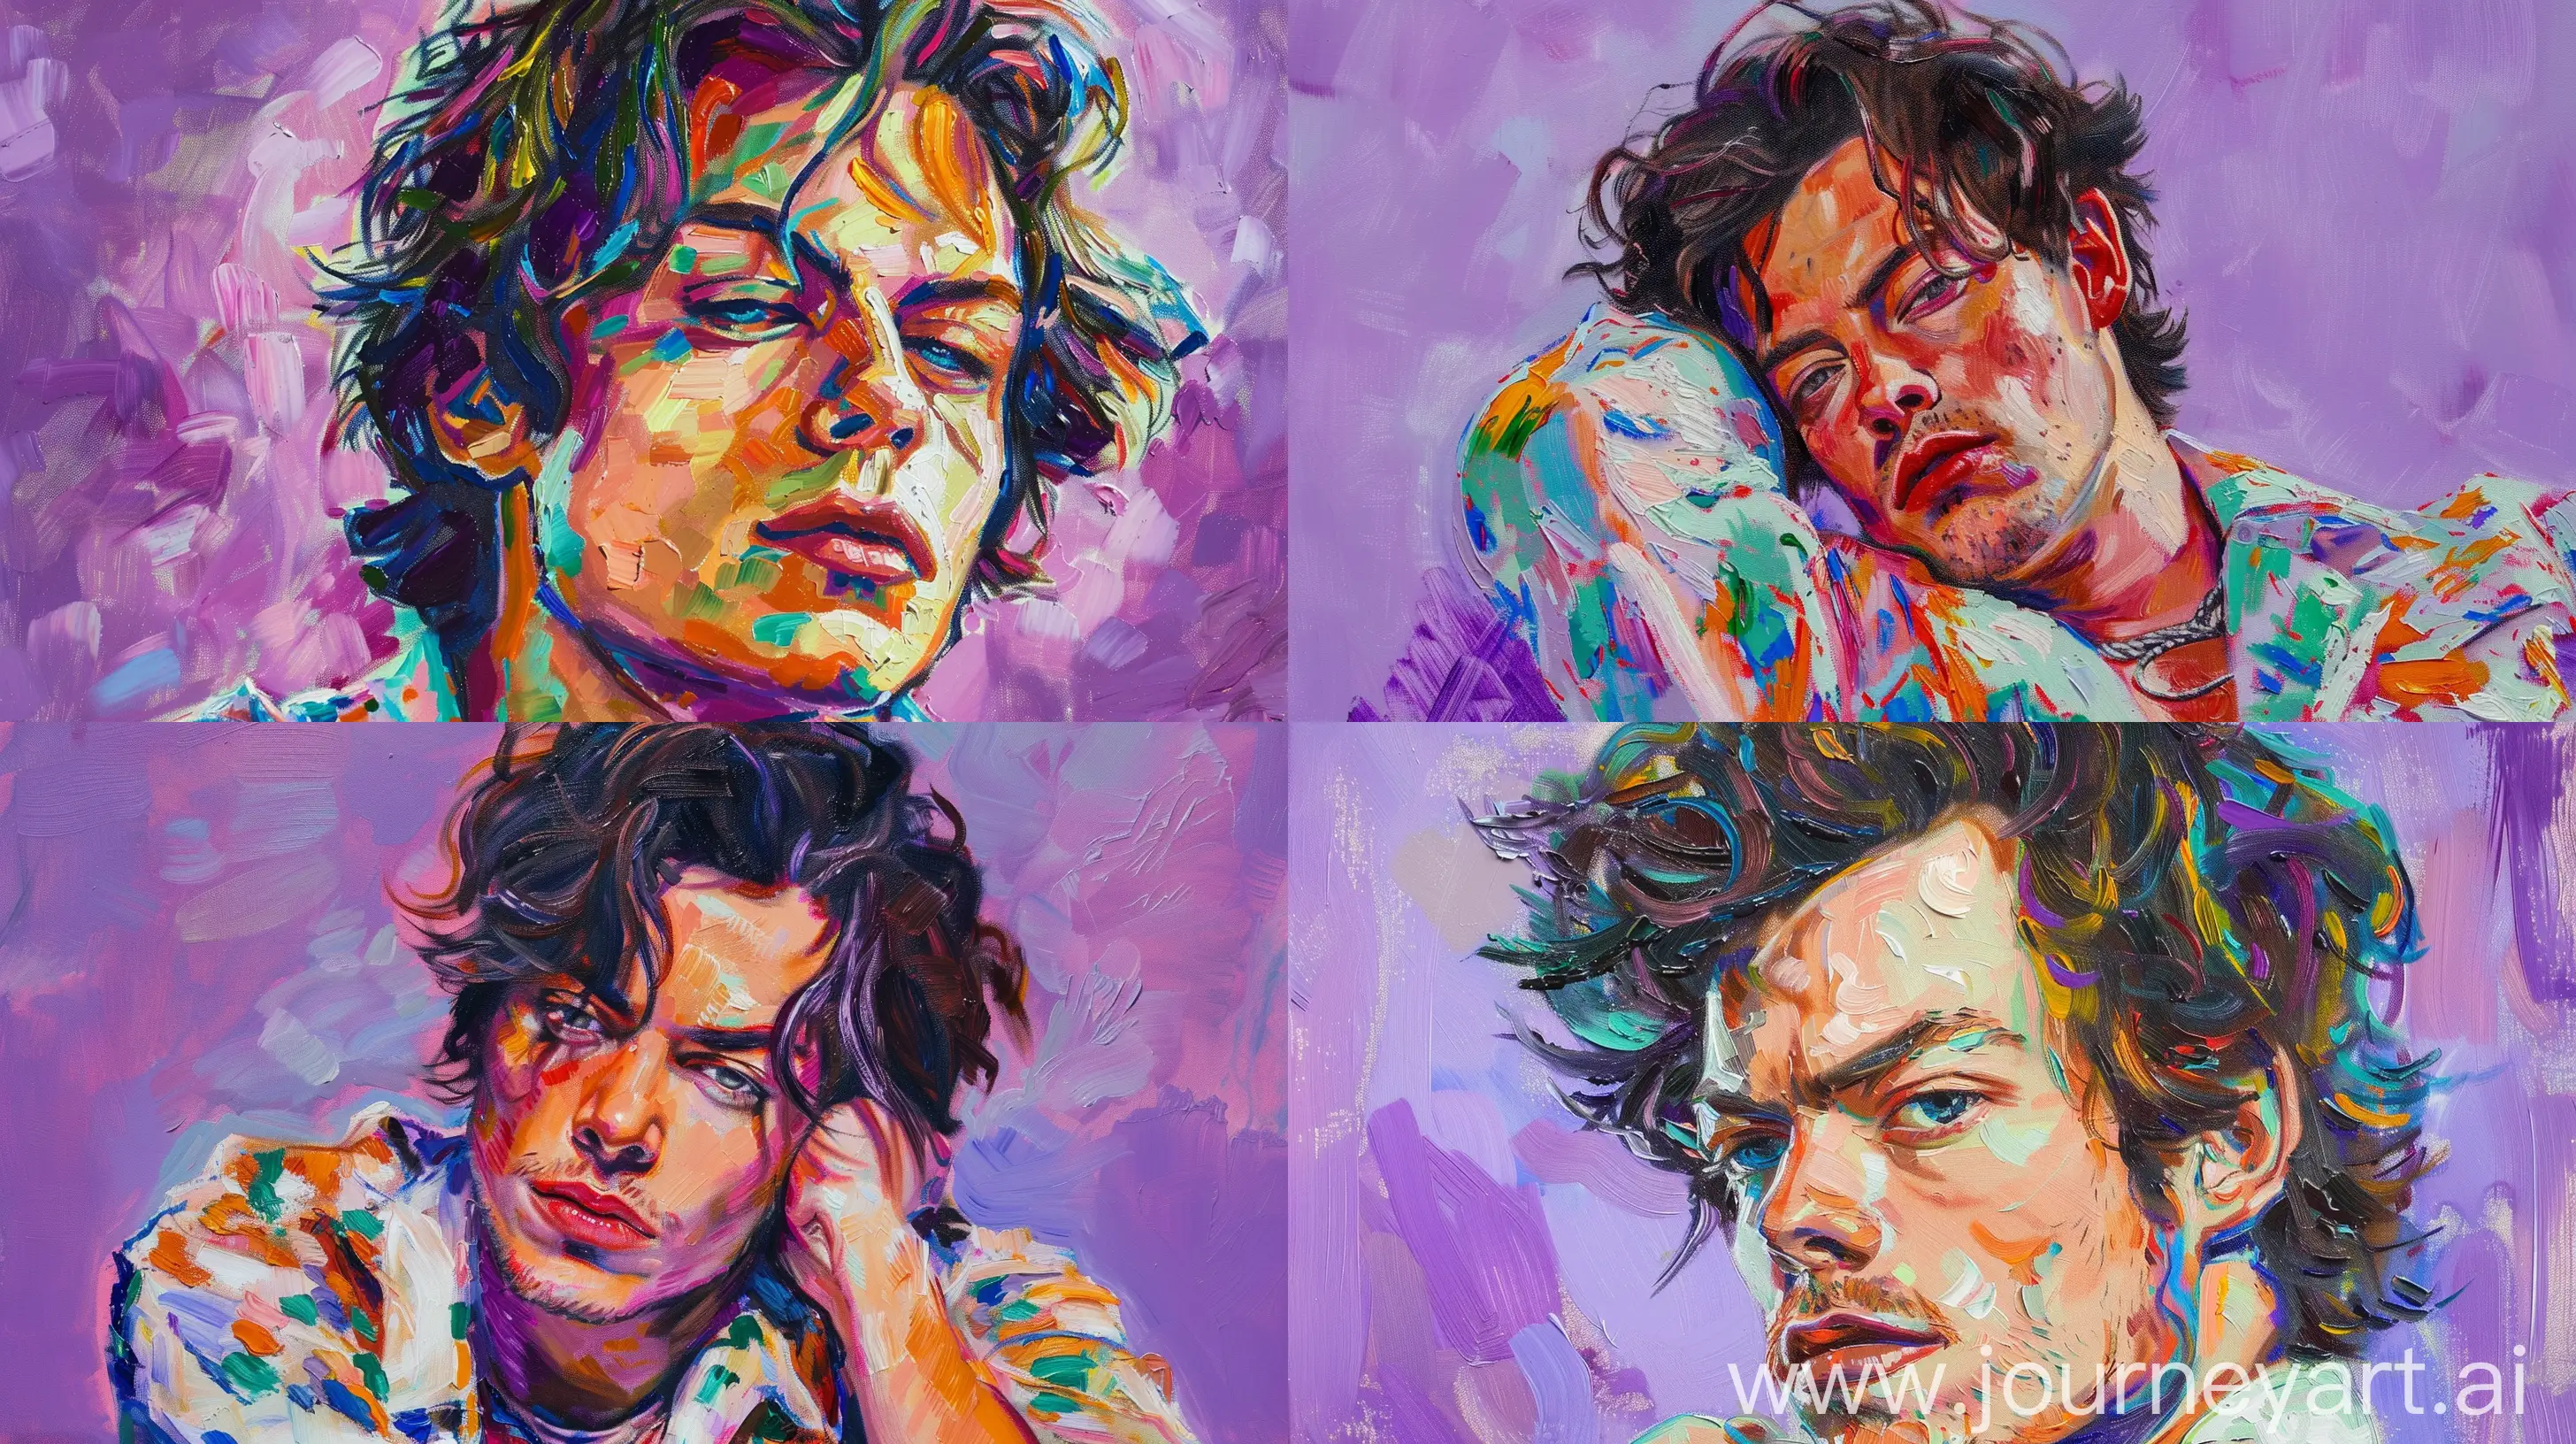 Vibrant-Van-Gogh-Style-Oil-Painting-of-Harry-Styles-with-Soft-Pastel-Colors-on-Purple-Background